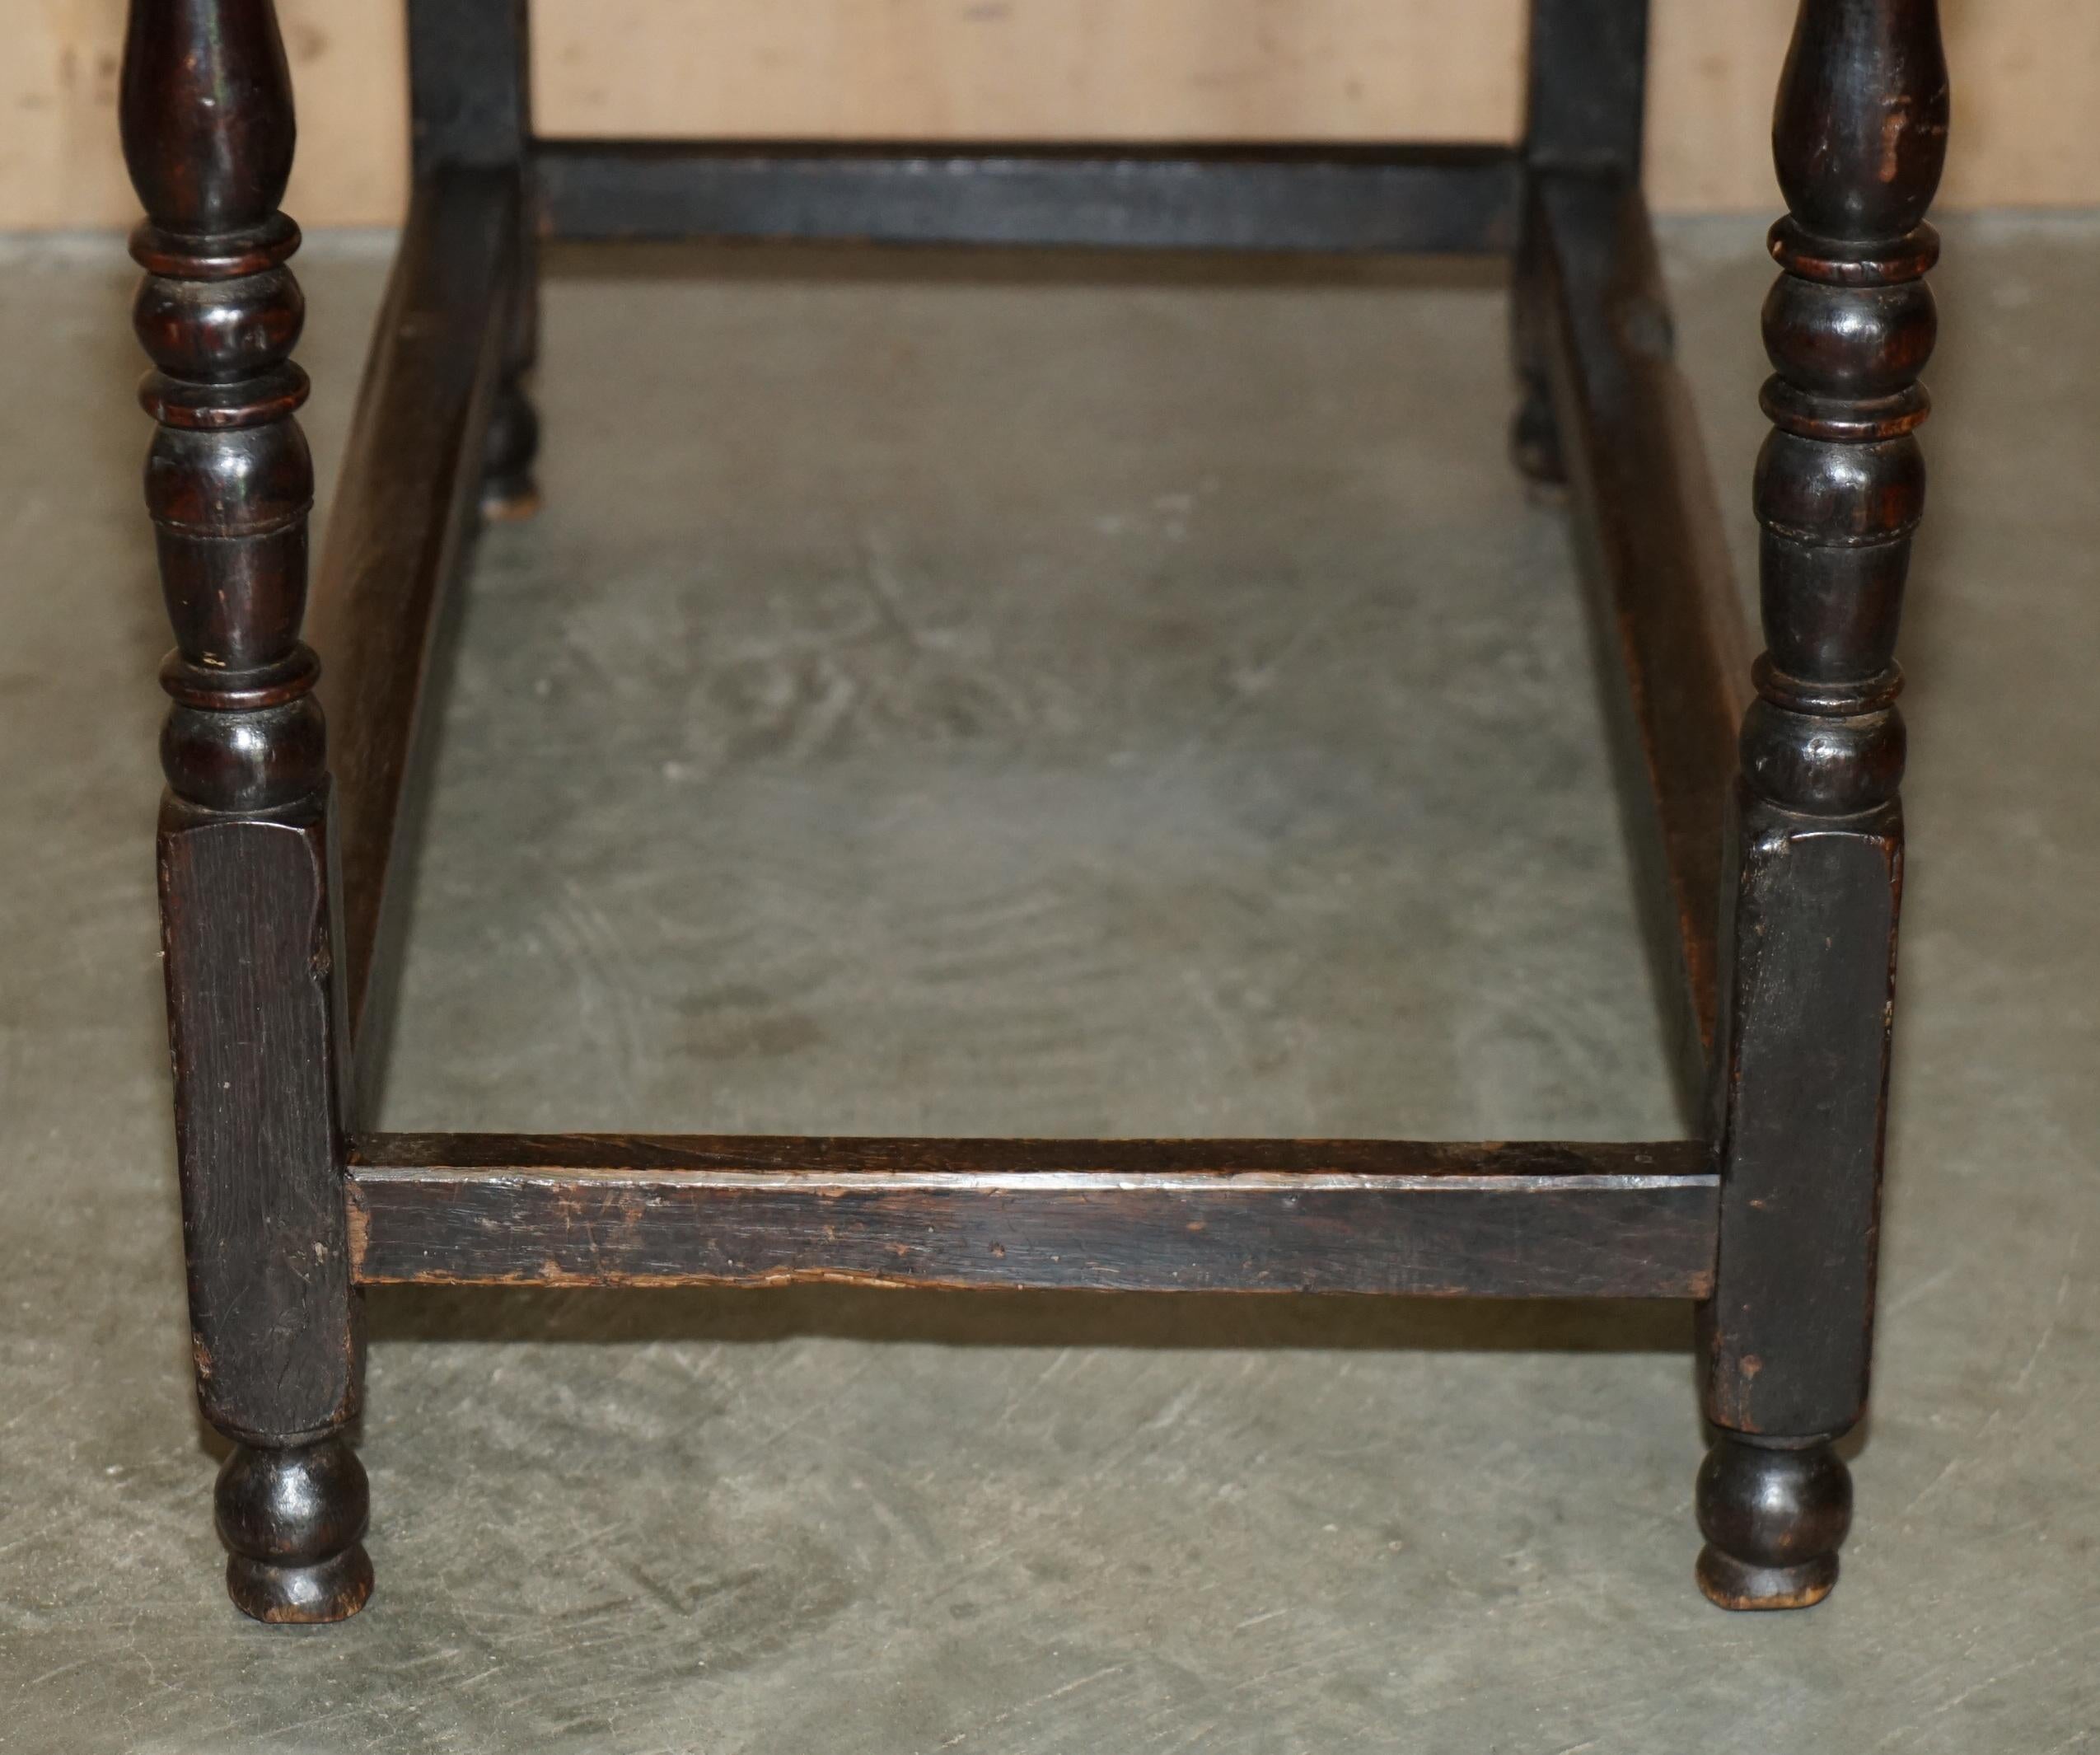 ANTIQUE ENGLISH 18TH CENTURY JACOBEAN CENTRE TABLE WiTH ORNATELY CARVED APRON For Sale 6